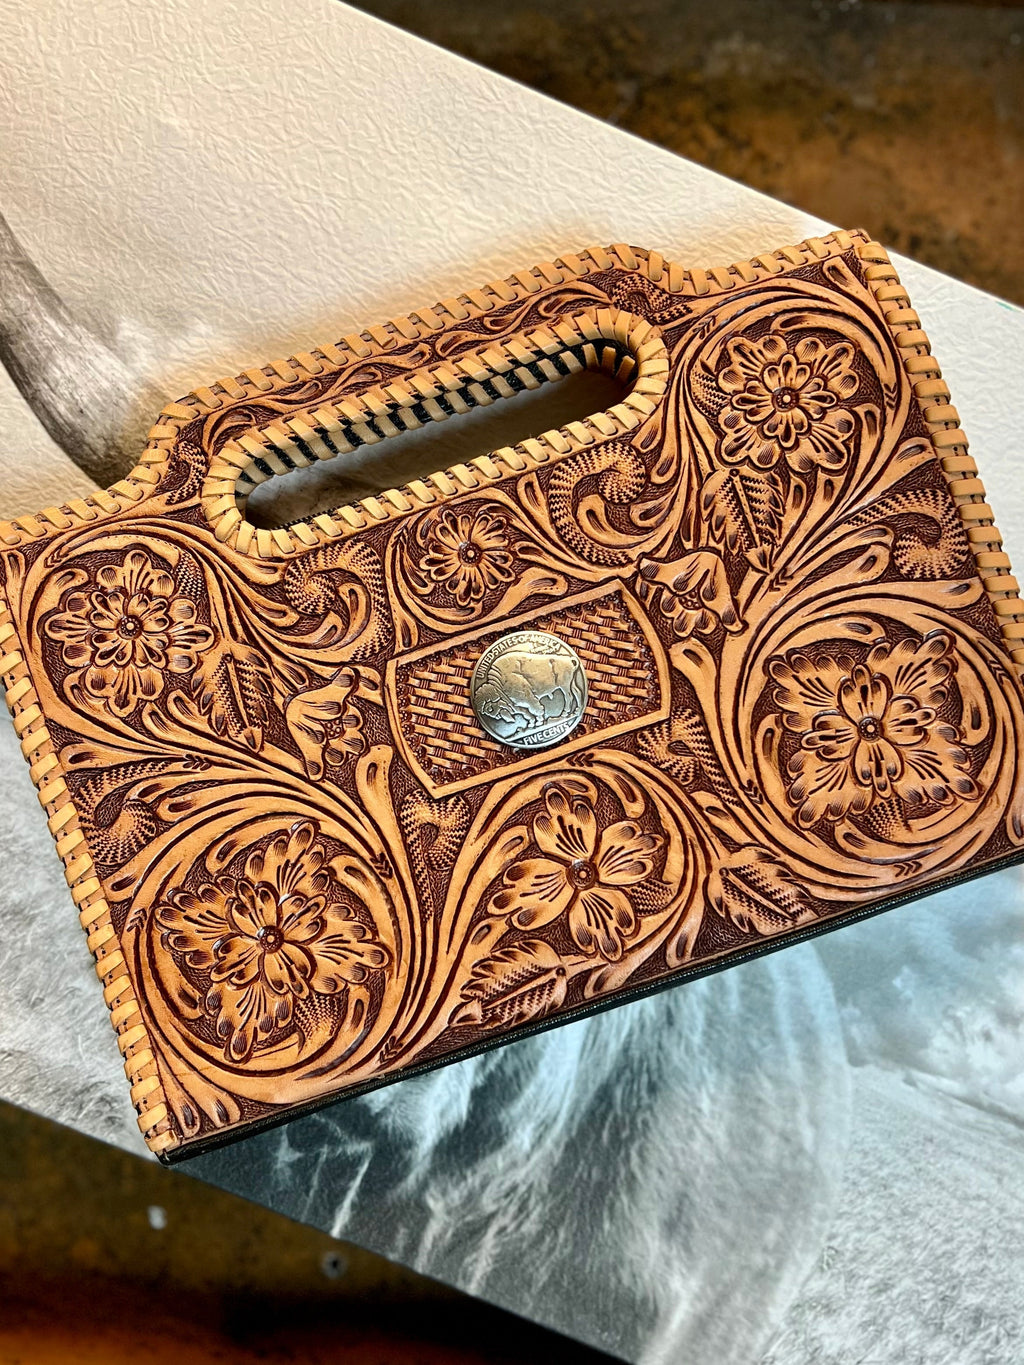 Tooled leather bag. Leather bag. Leather clutch. Leather shoulder bag. Tooled leather. Buffalo. Whipstitching. Western Style. Cowgirl bag. Cowgirl accessories. Western accessories. Western boutique. Cowgirl Boutique. Small business. Woman owned. 